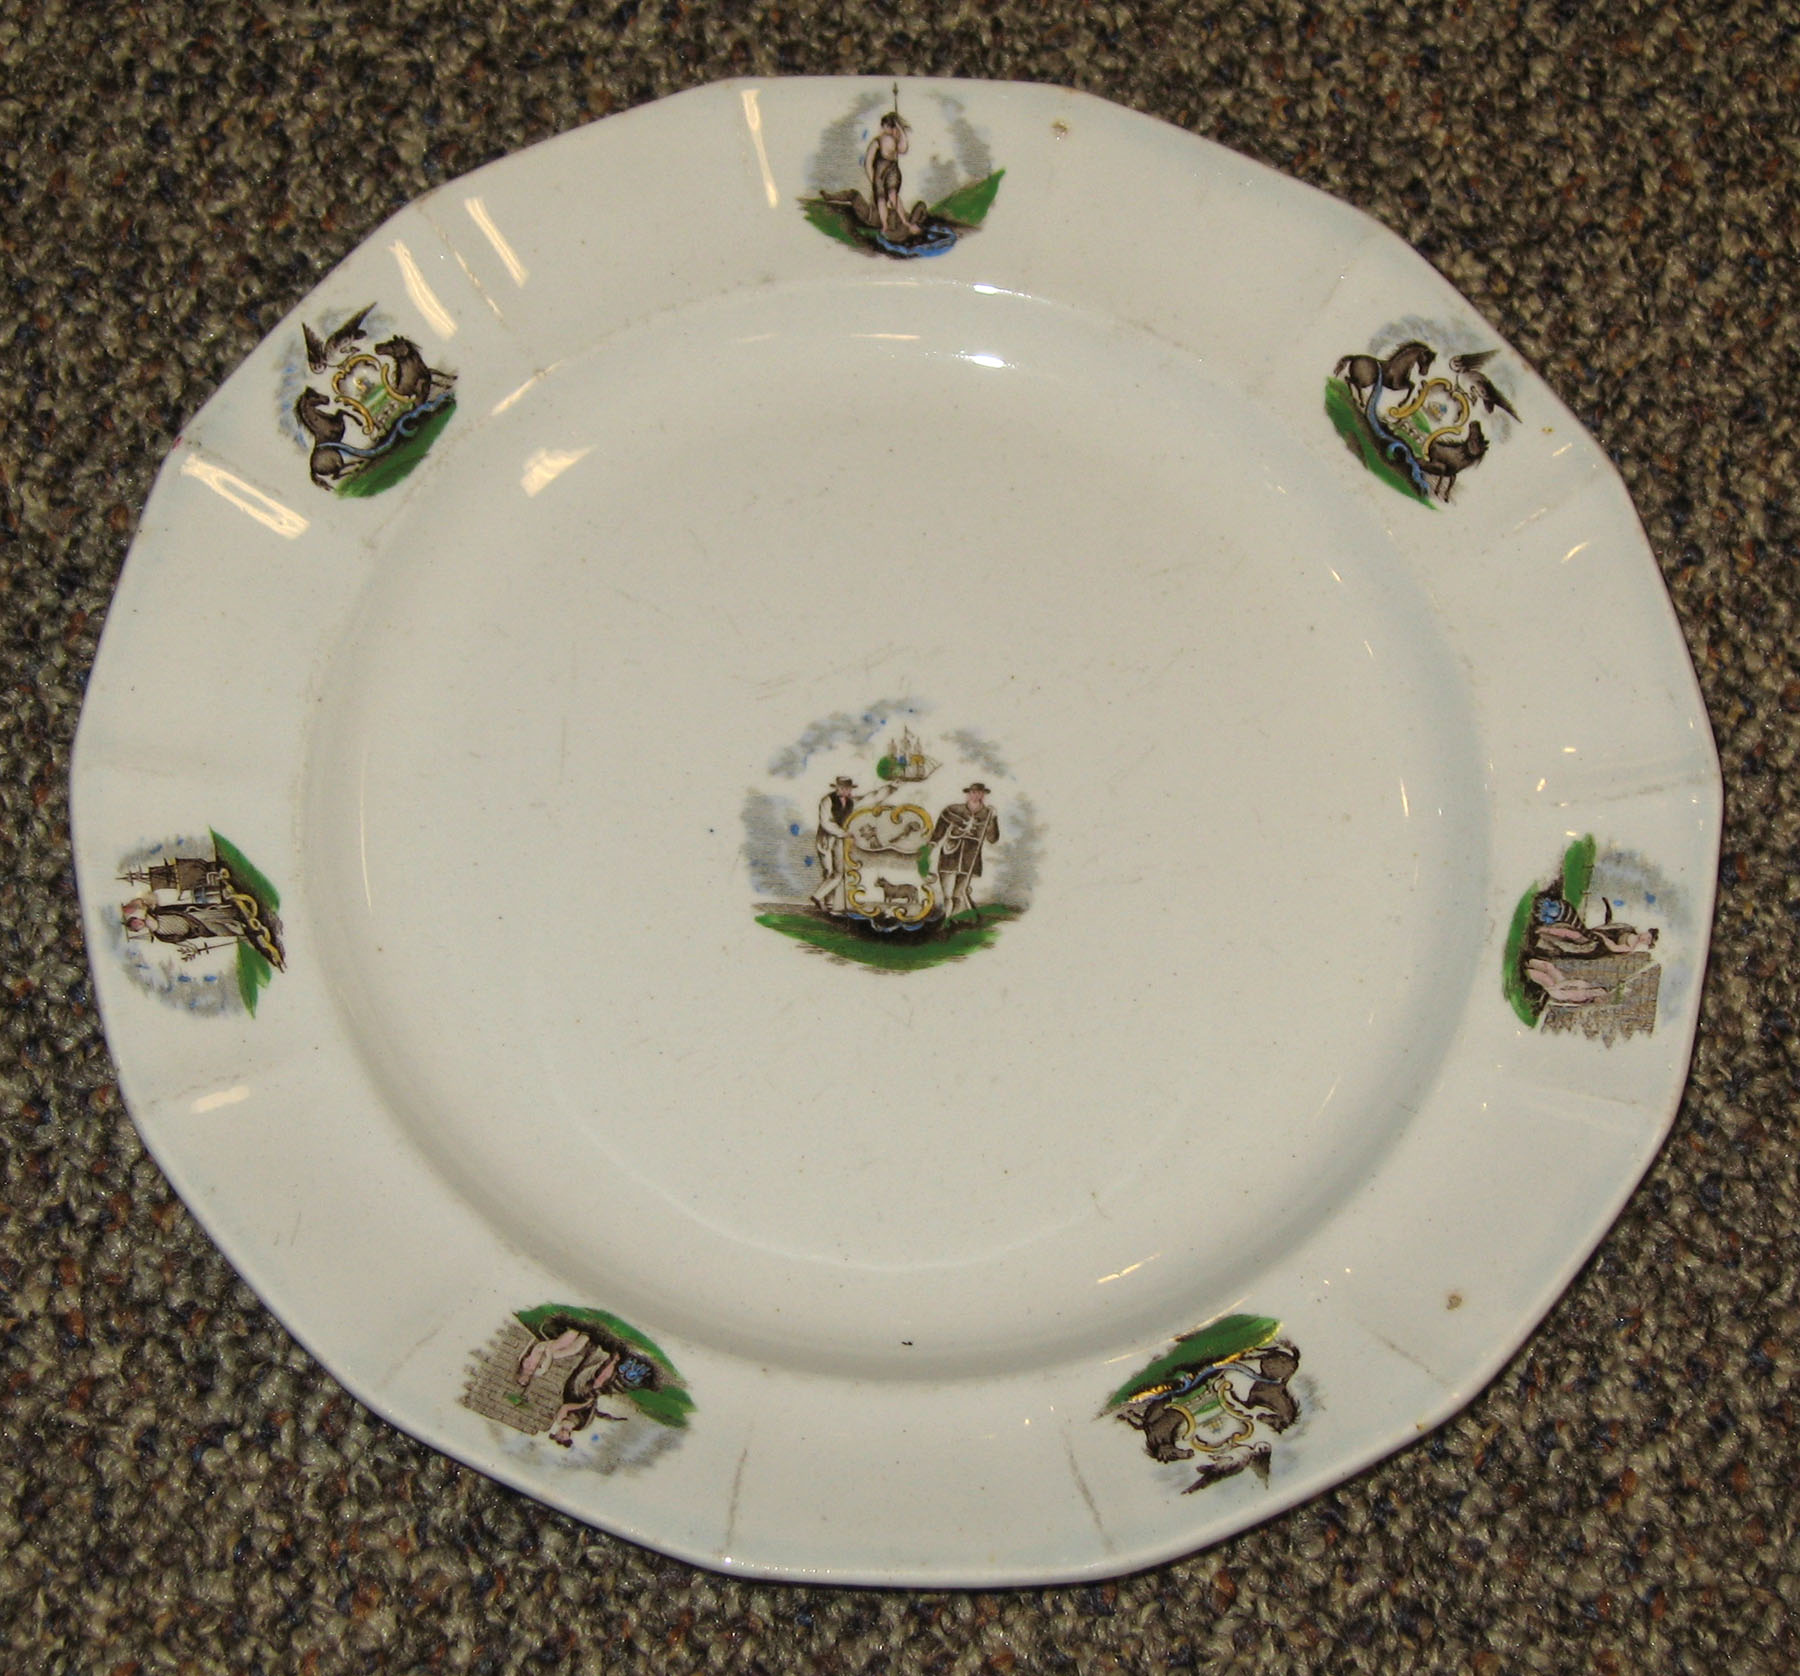 1964.1907 Ironstone plate with Delaware arms